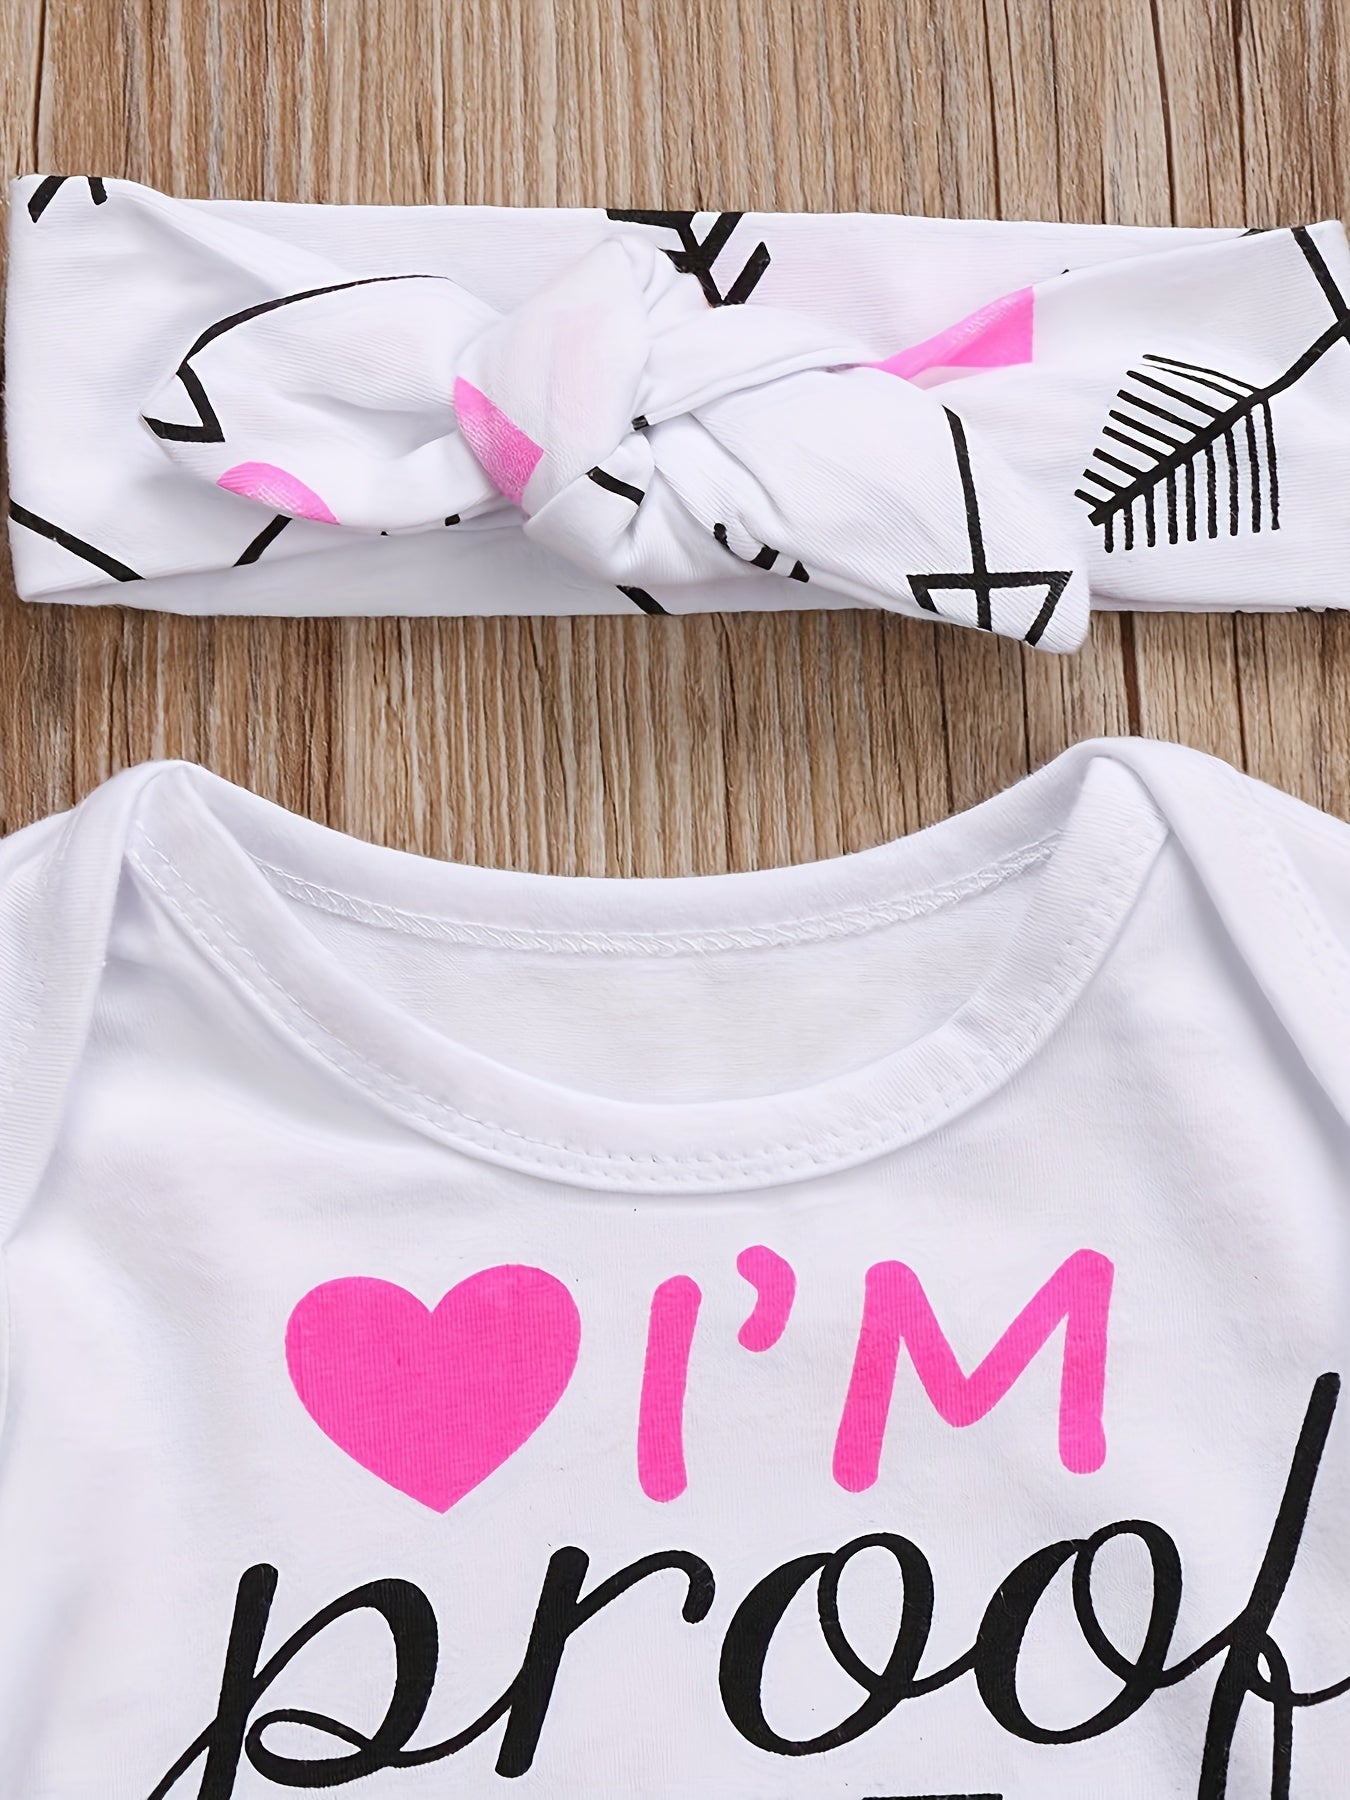 I'm Proof That Miracles Happen Christian Toddler Casual Outfit claimedbygoddesigns